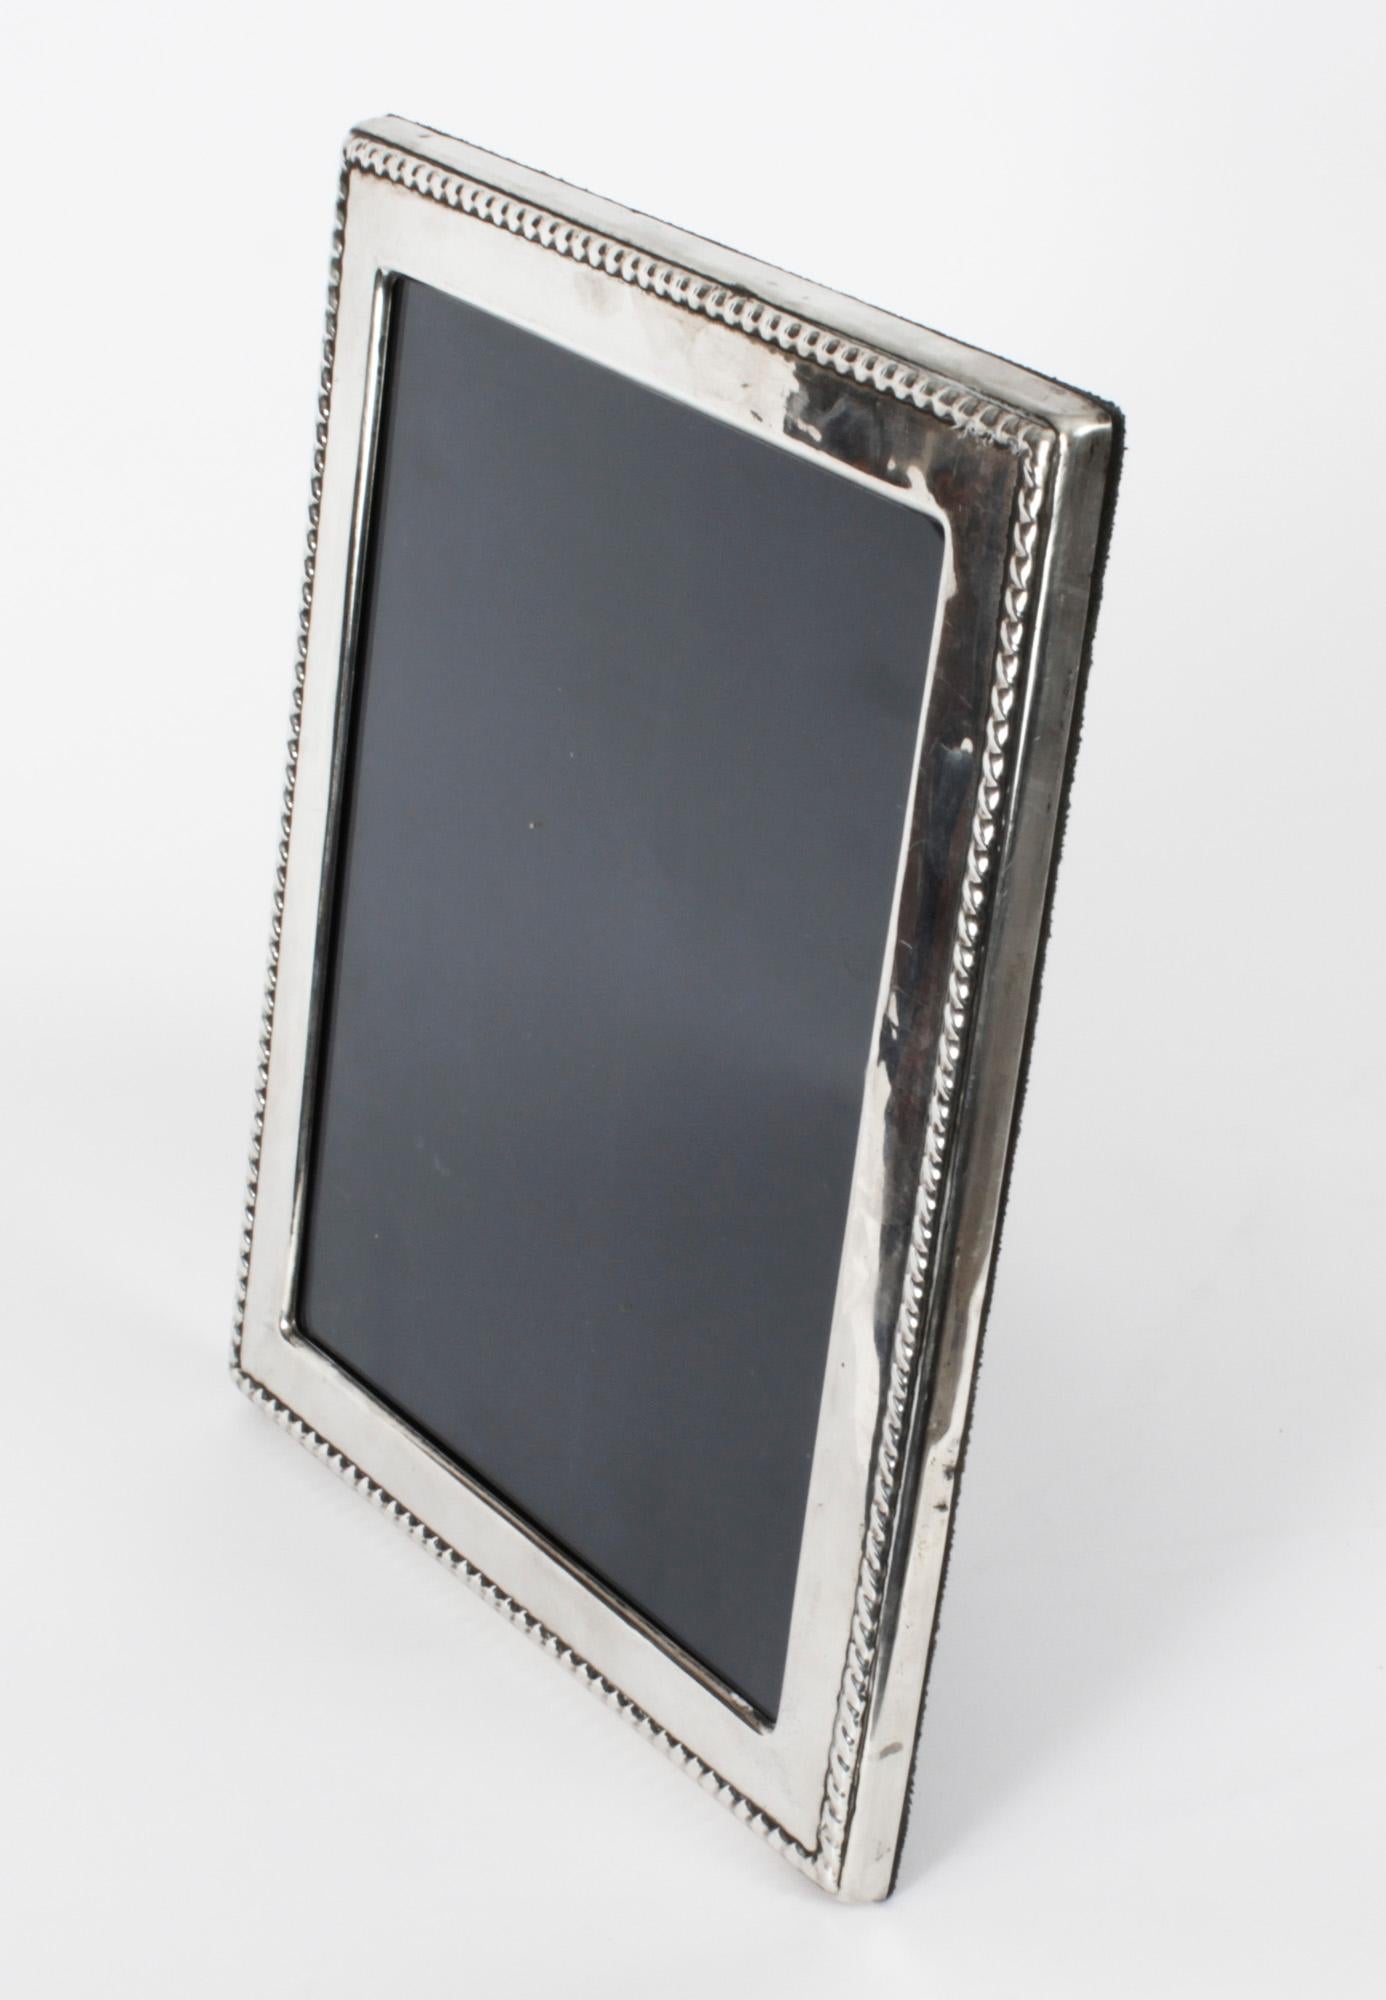 A truly superb large decorative sterling silver photo frame by A & J Zimmerman Ltd of Birmingham with hall marks for Birmingham 2012.

Beautifully portrait frame decorated with scaloped relief borders. 

An excellent gift idea for many occasions